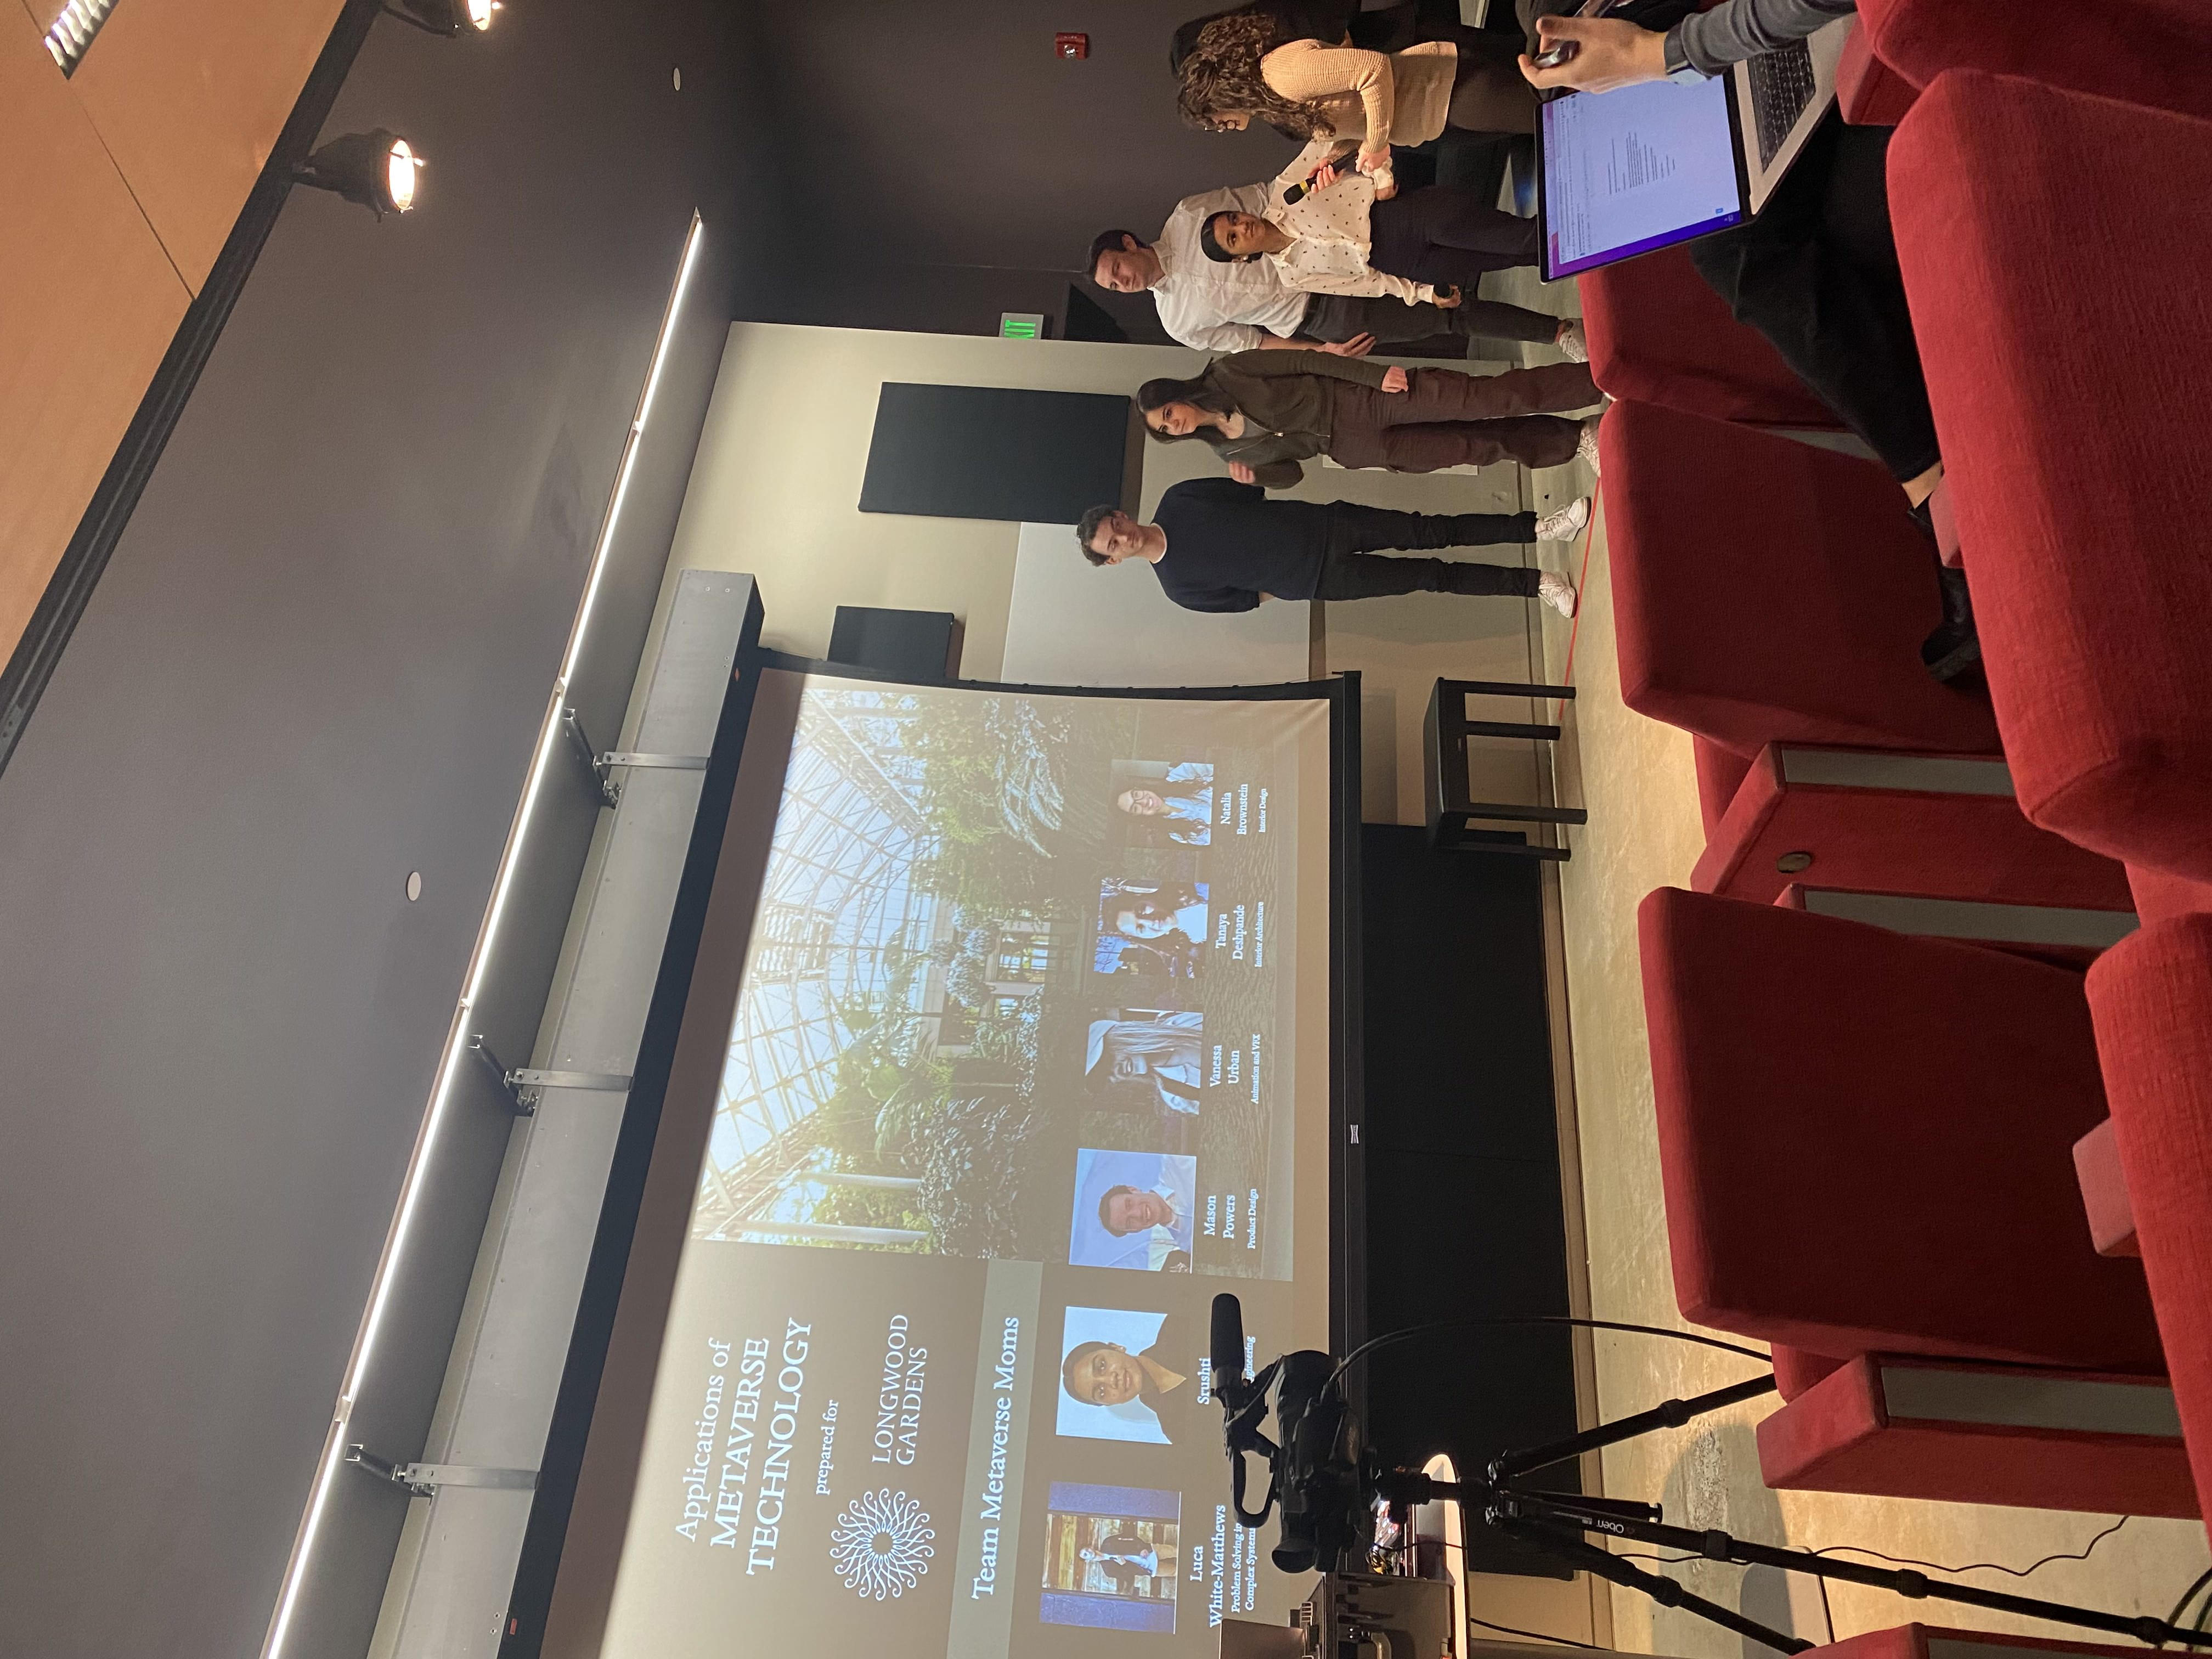 A team of students presenting in front of a projection screen that reads "Applications of Metaverse Technology"